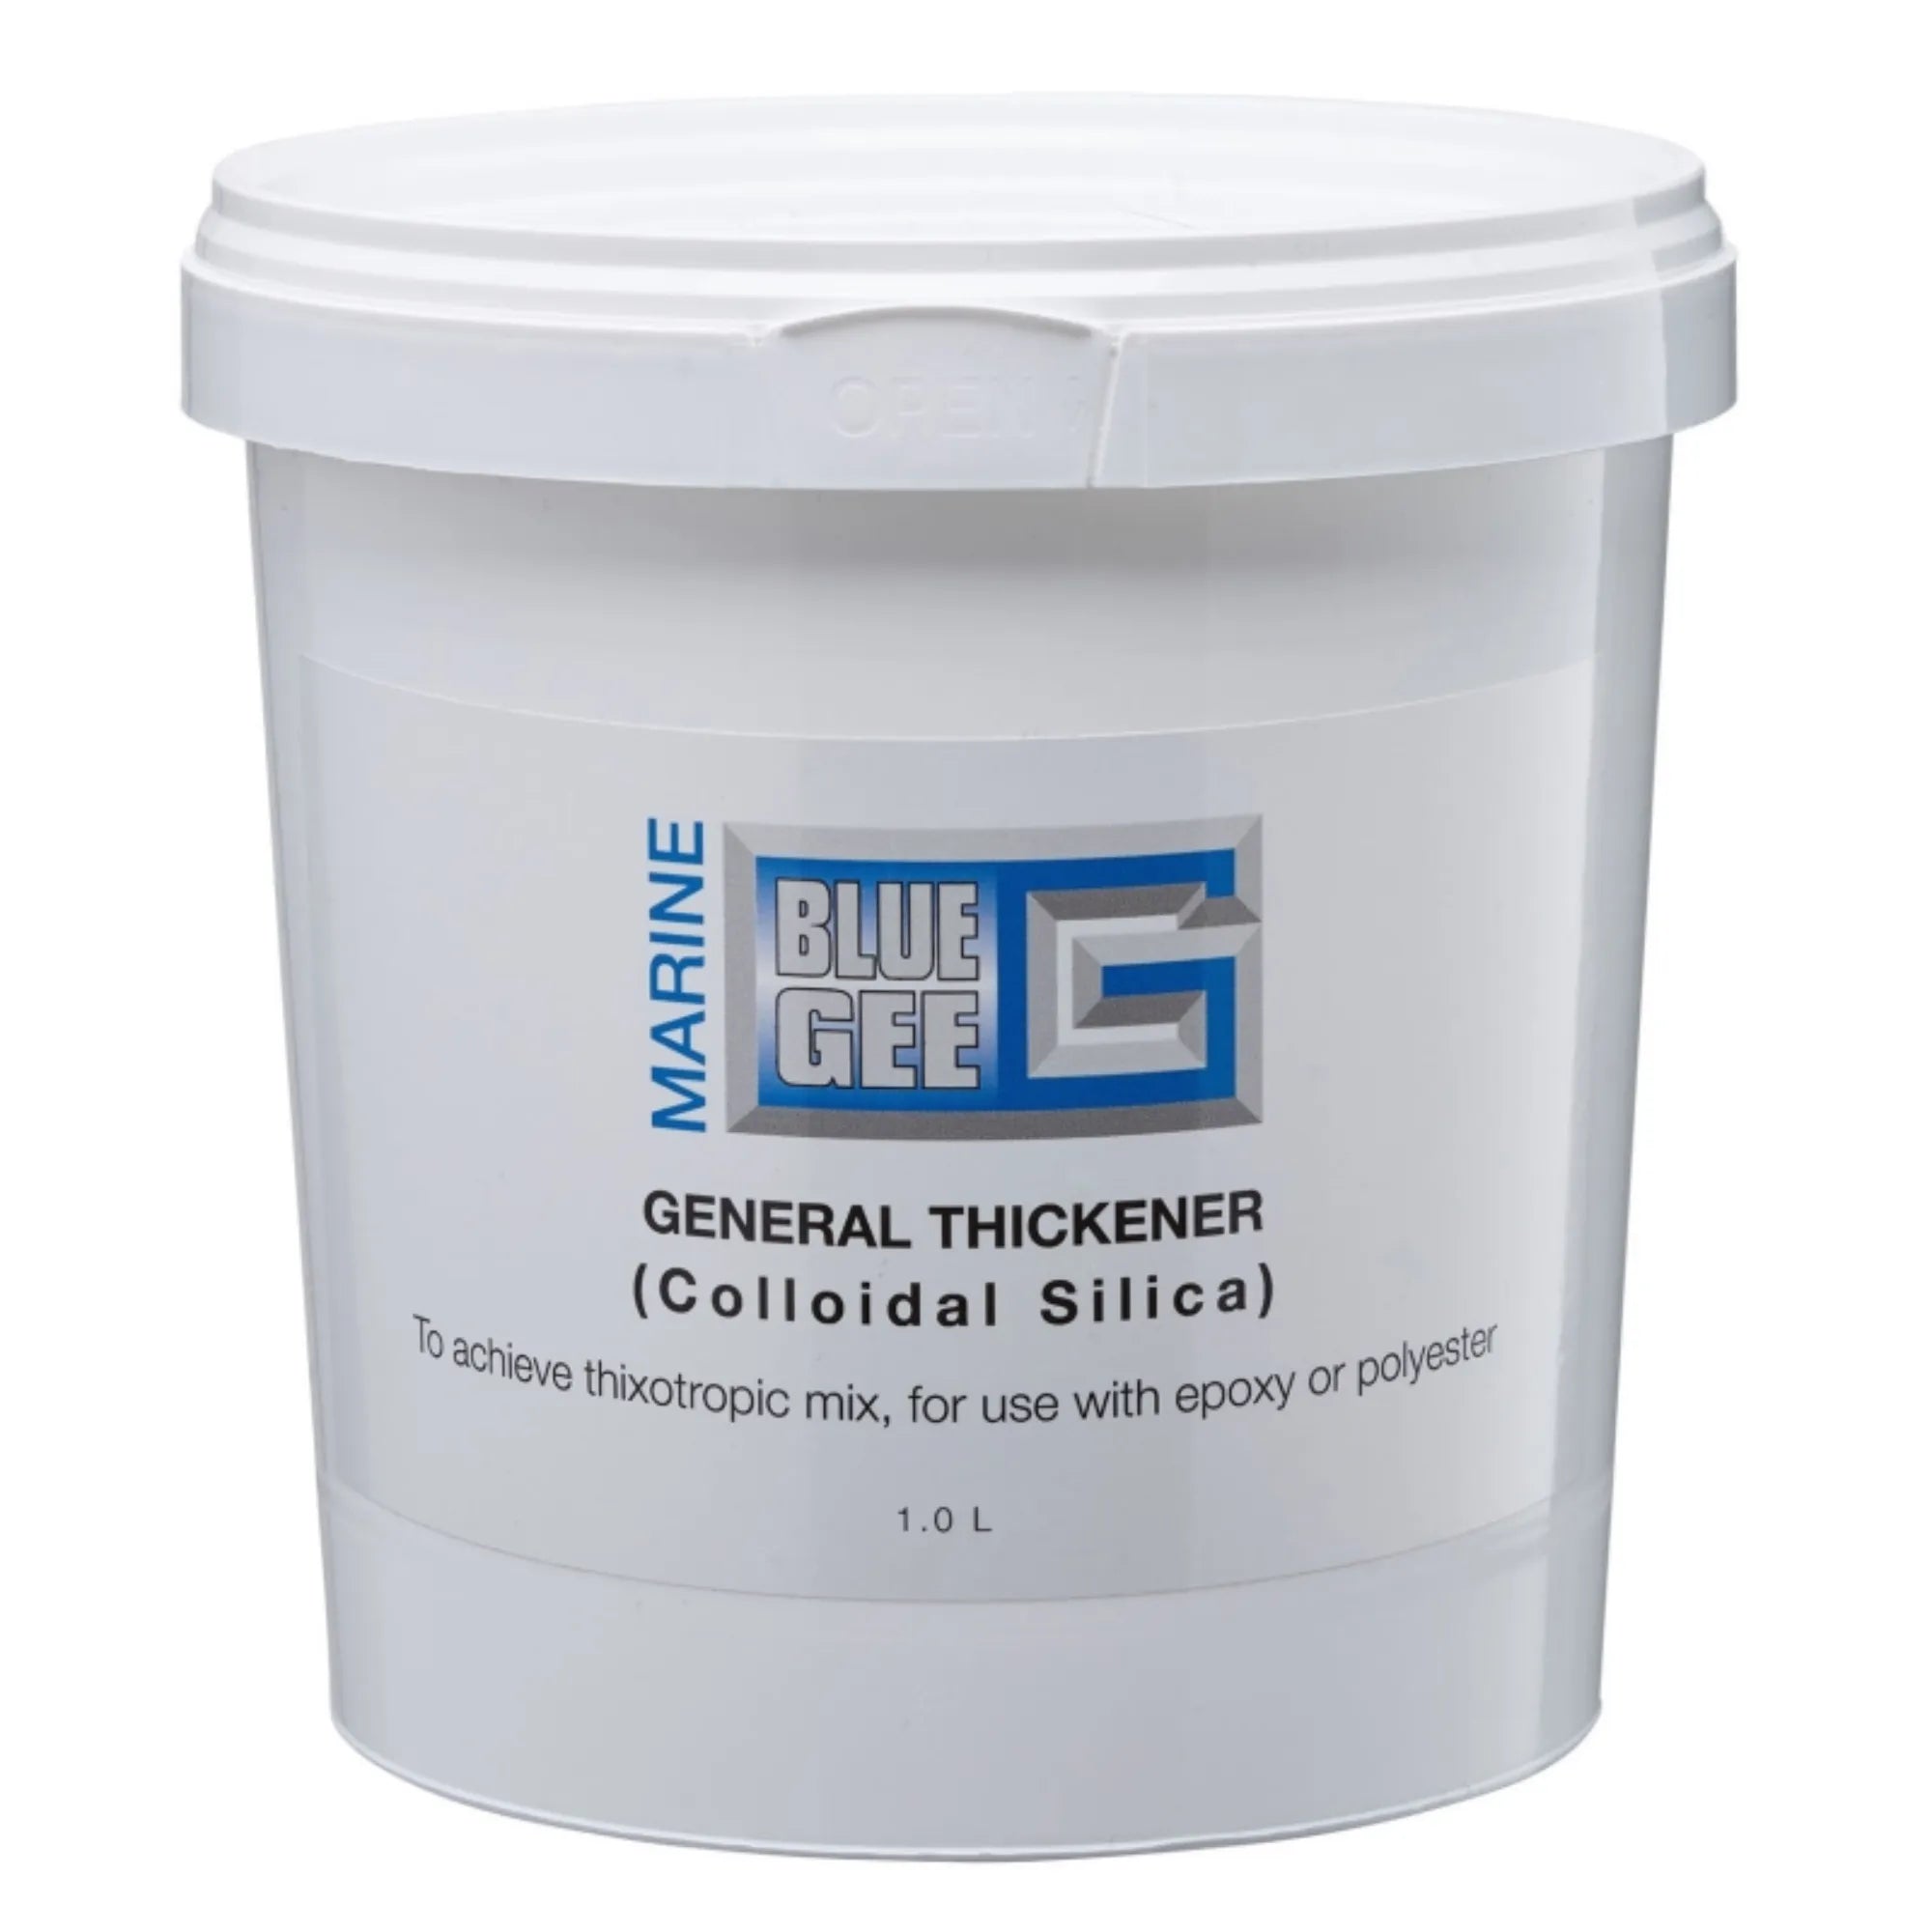 General Thickener (Colloidal Silica)